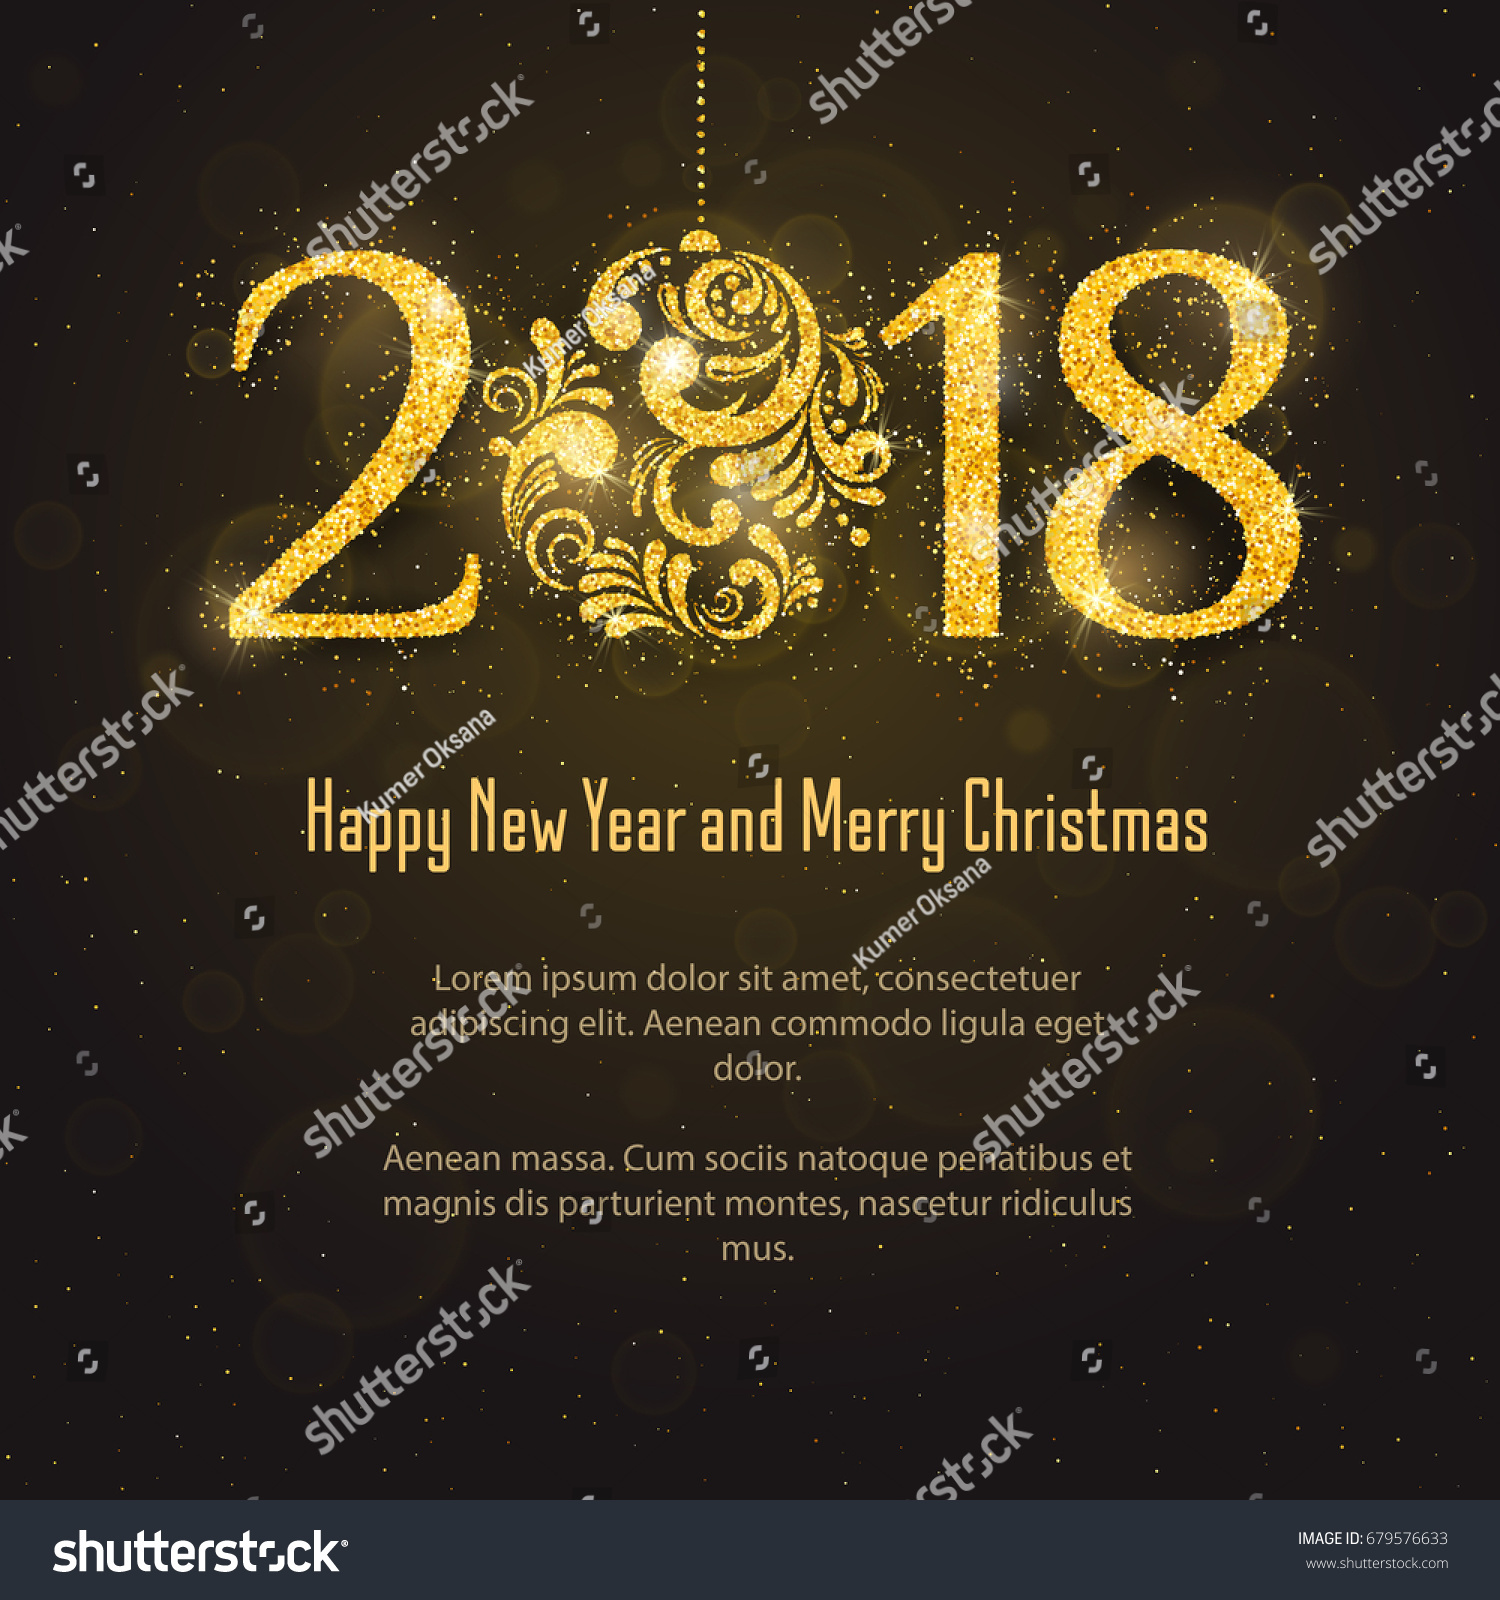 Vector 2018 Happy New Year and Merry Christmas greeting card with sparkling glitter golden textured Christmas